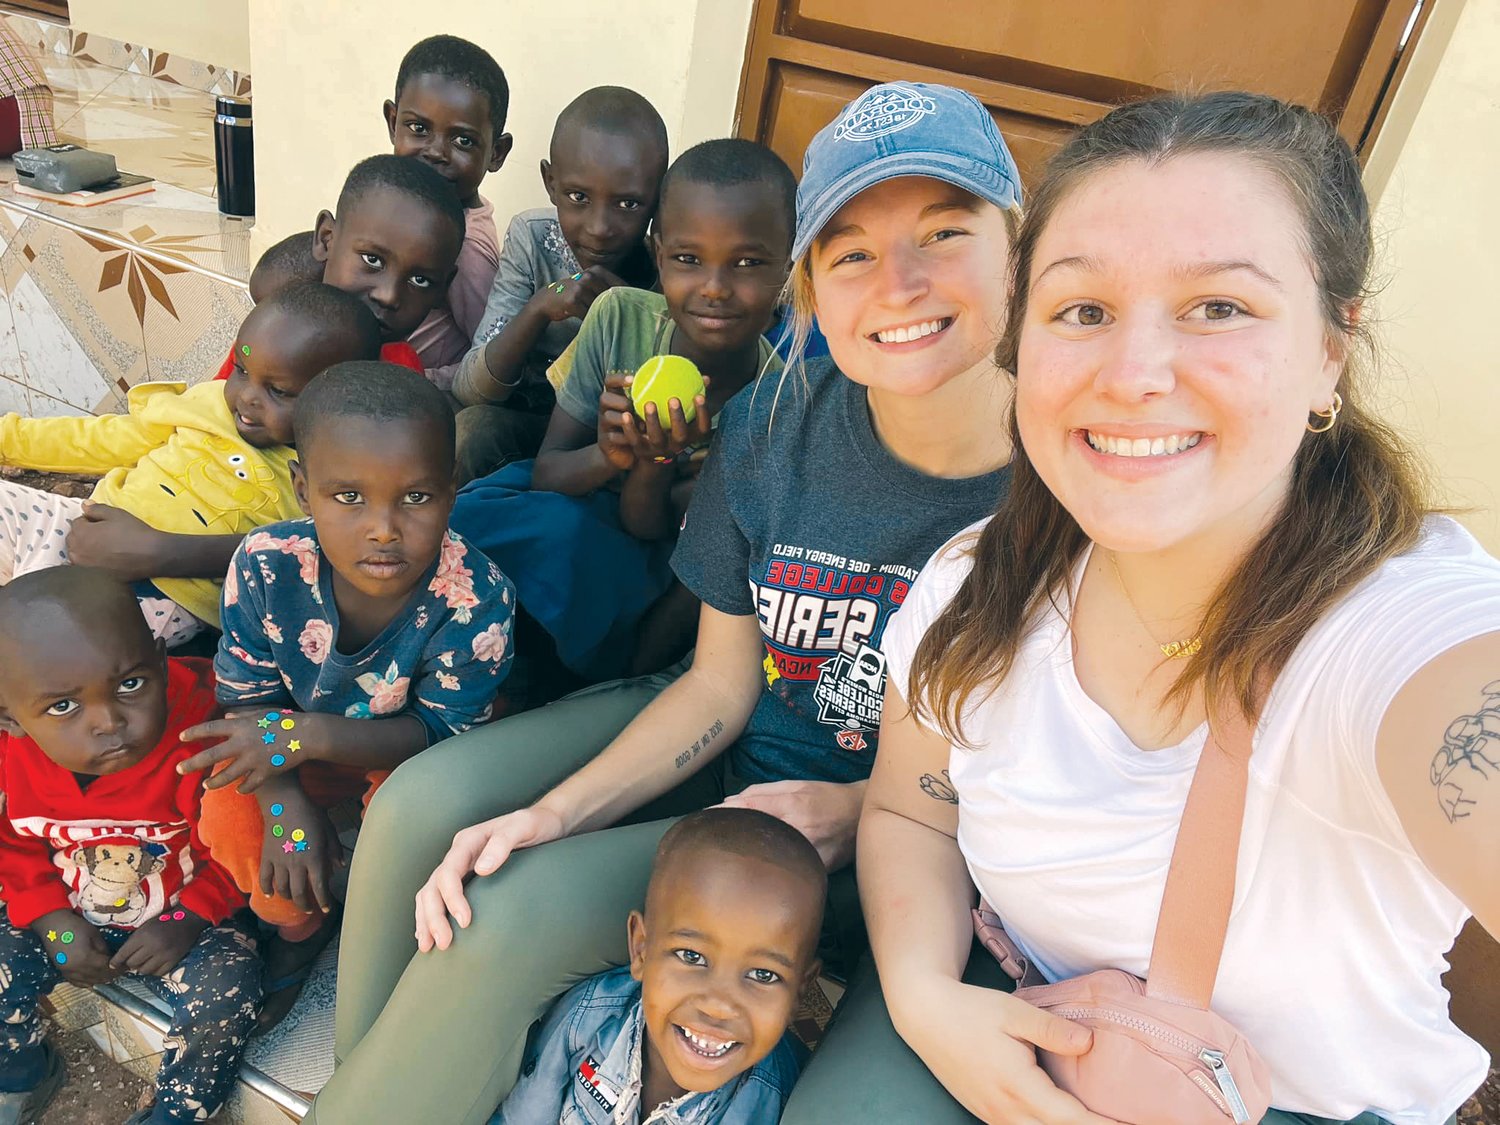 AFRICAN MISSION — Riley Heiliger, right, of Wright City, recently traveled to Tanzania, Africa with the charitable organization Humanity for Children. Her team provided education and care to birthing mothers and newborns in the poverty stricken country. Heiliger will graduate from Westminster College in May and pursue her goal to become a physician’s assistant in the area of obstetrics and gynecology. The items in the photo were given to her by local women she served in Tanzania.